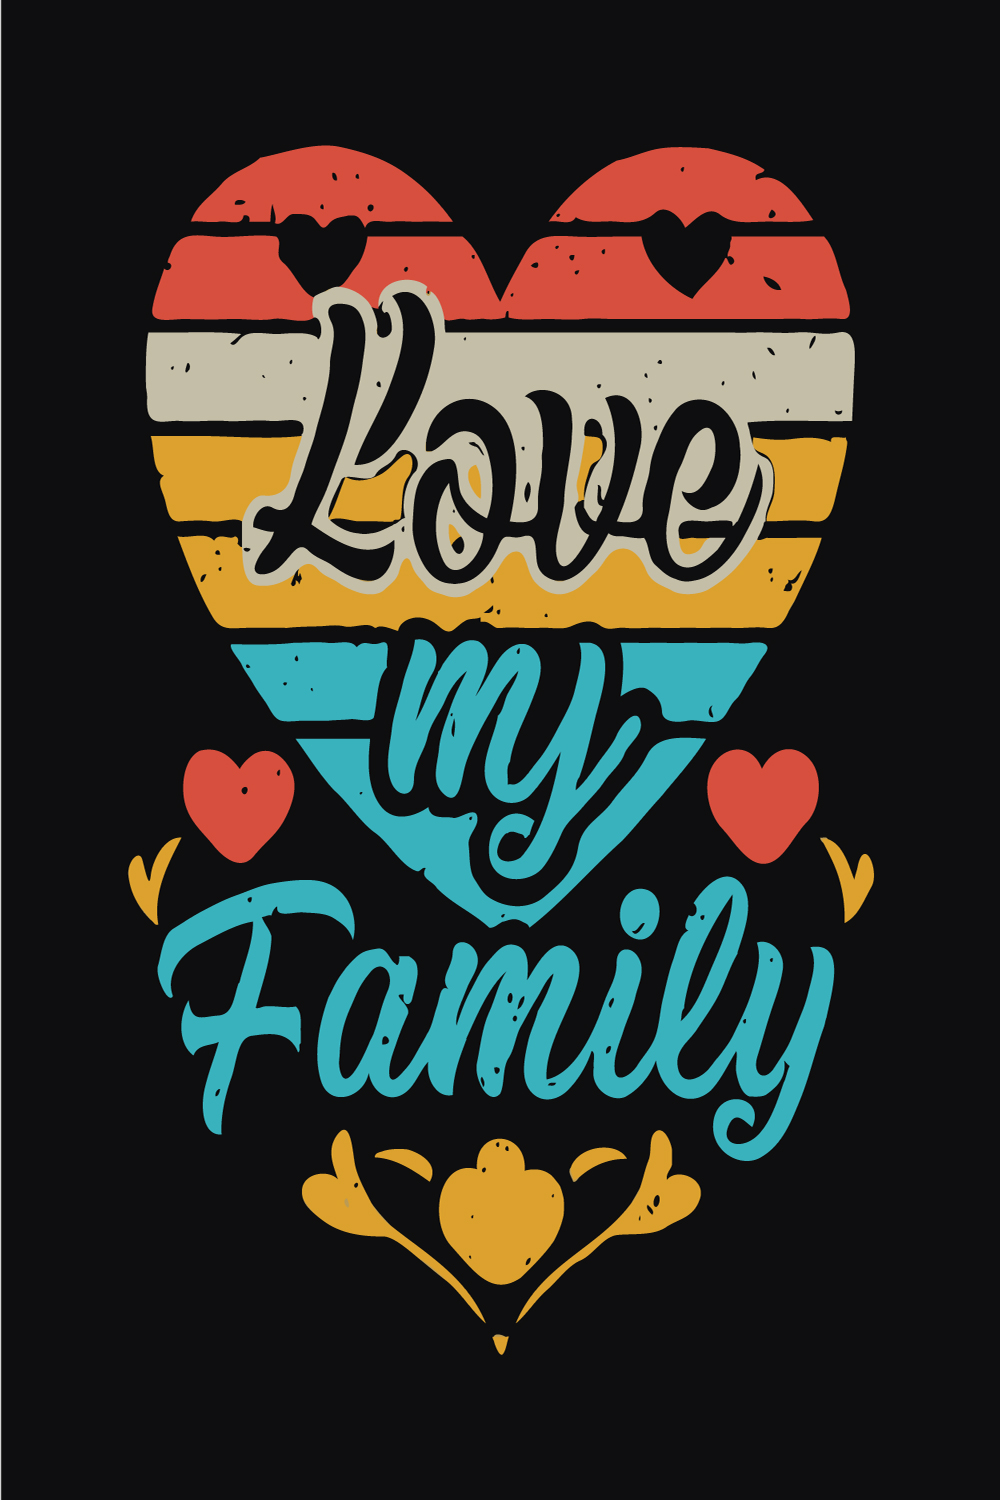 Love my family unique quote Vector illustrationtrendy phrase for t-shirts, cards Family Day pinterest preview image.